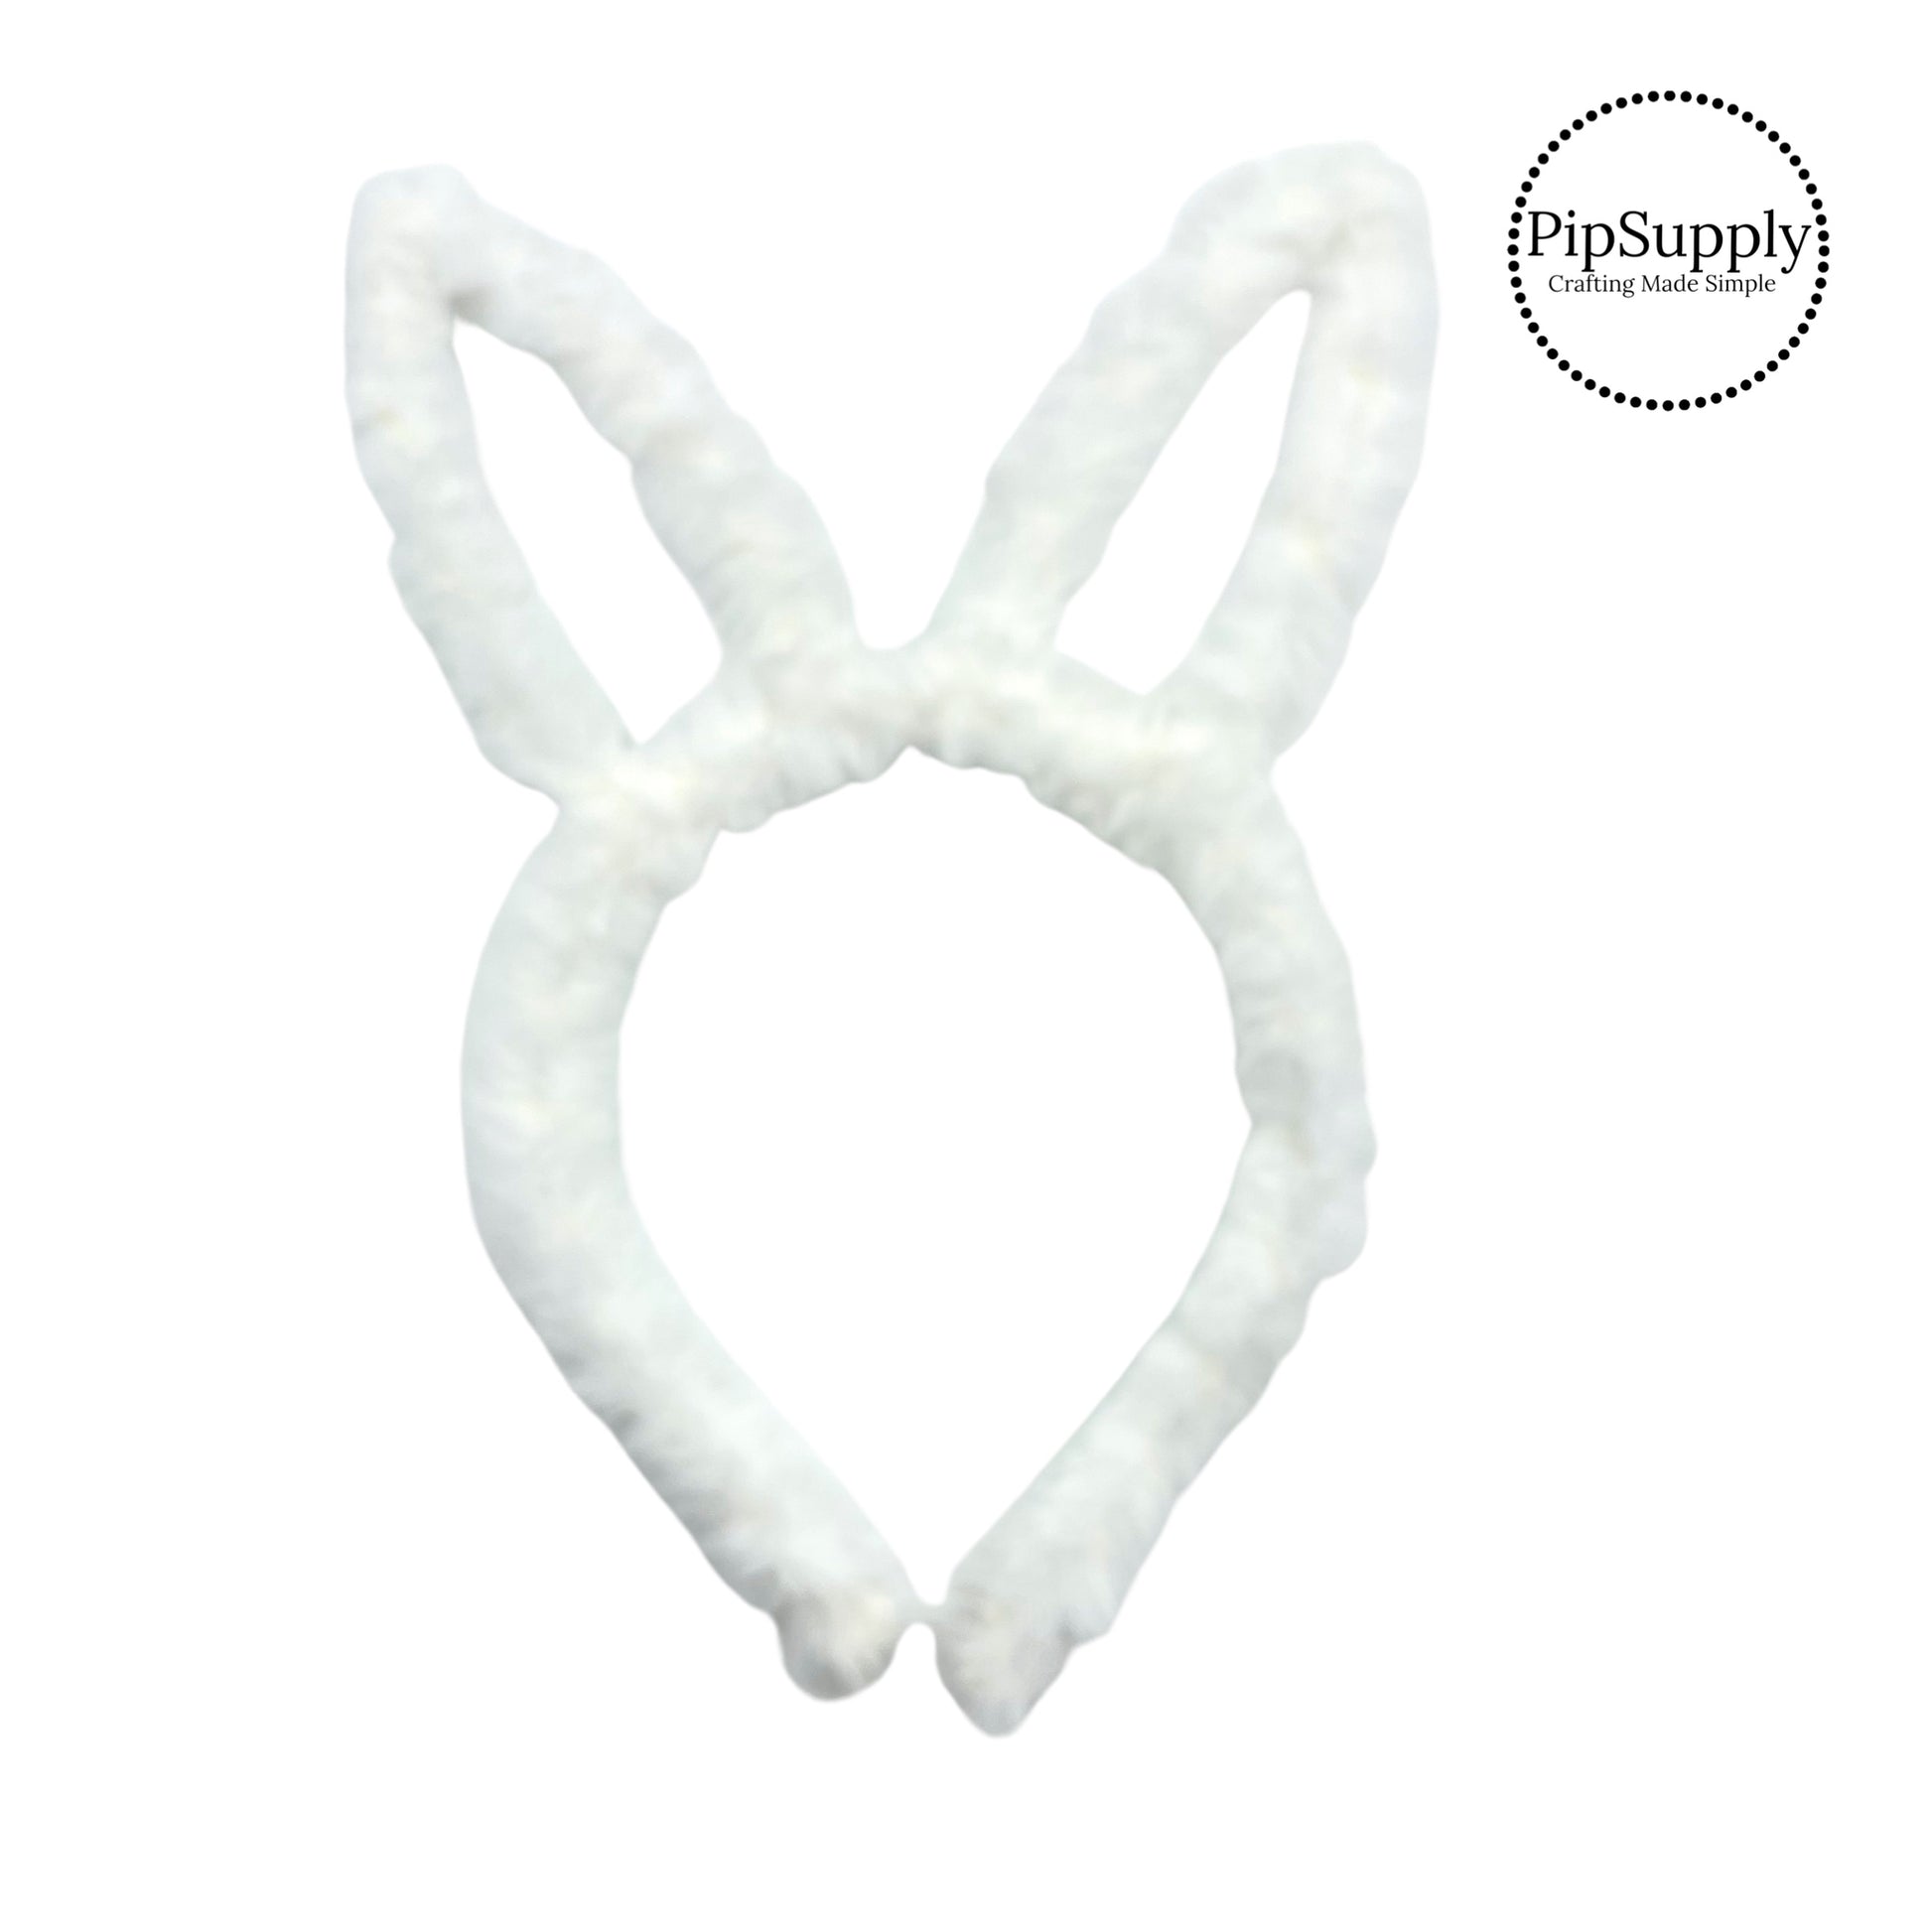 metal headband covered in soft white fur in the shape of bunny ears